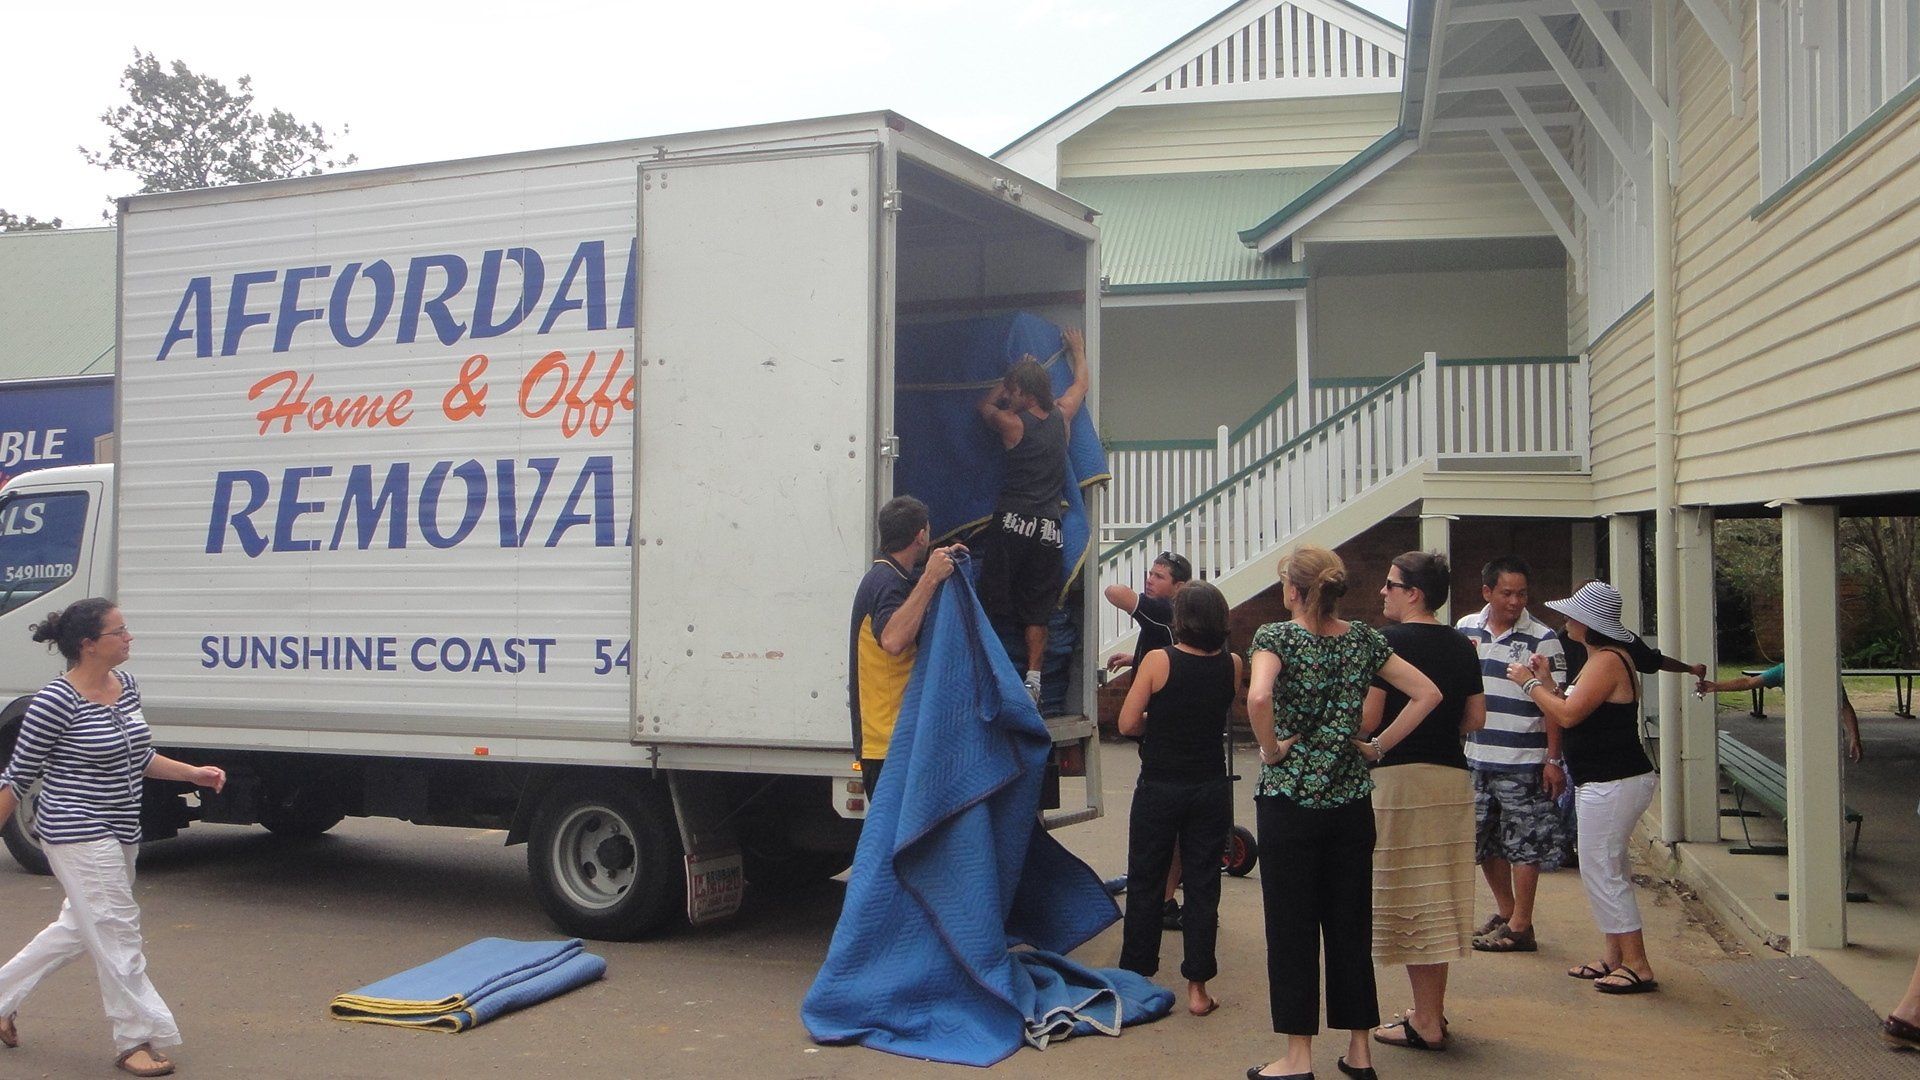 Home Removals Team — Queensland — Affordable Home & Office Removals